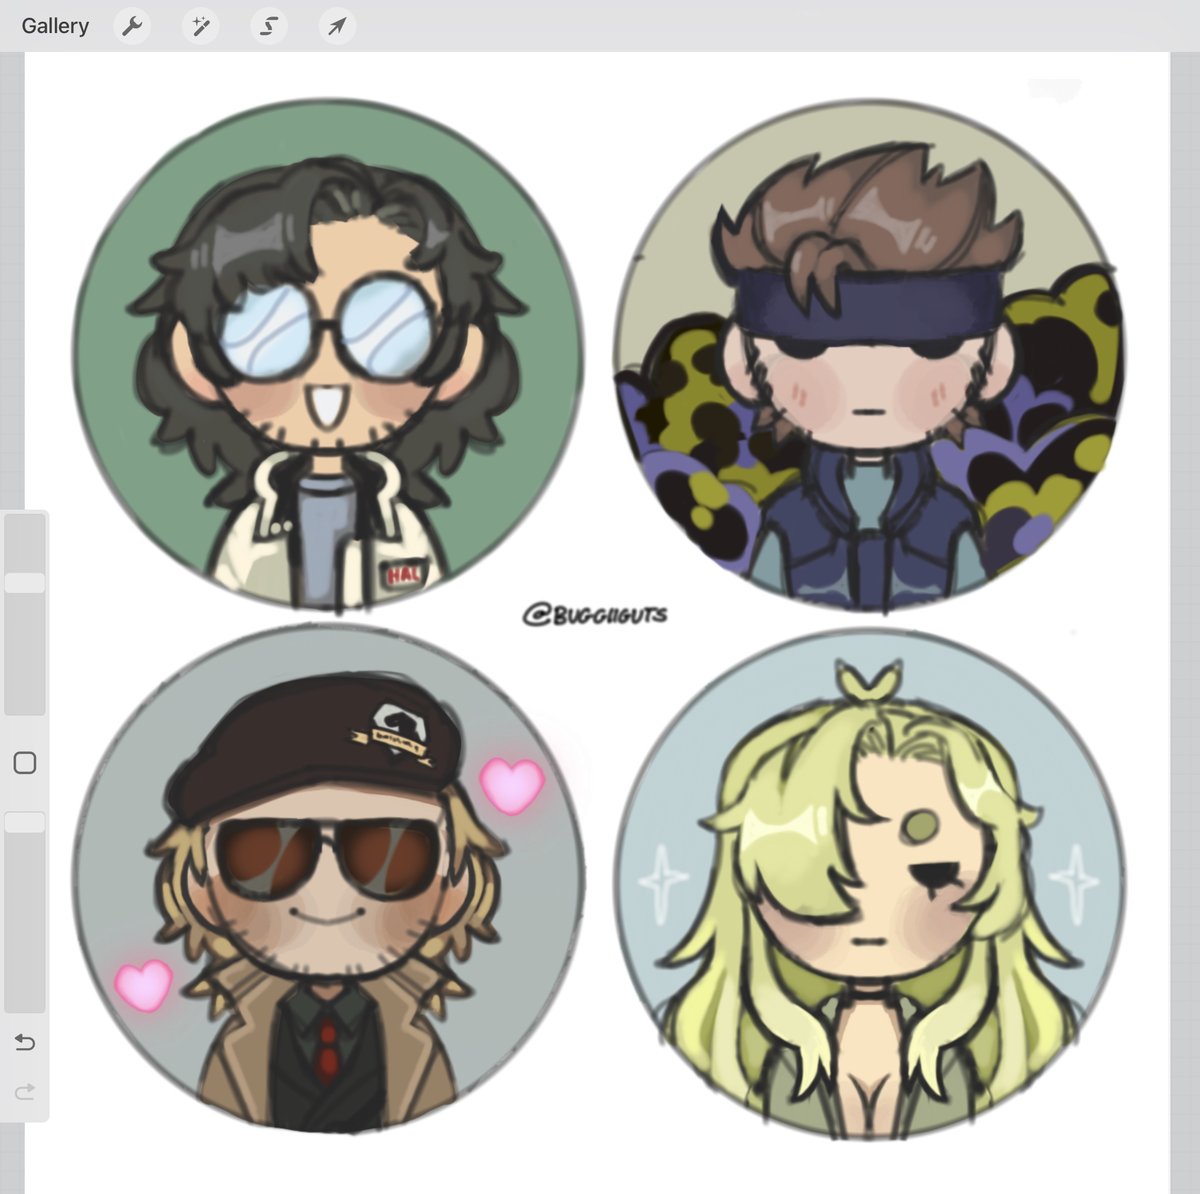 Metal gear solid pin designs
(MGSV Kaz is here because I luv him)
☆
#MetalGearSolid #MGS